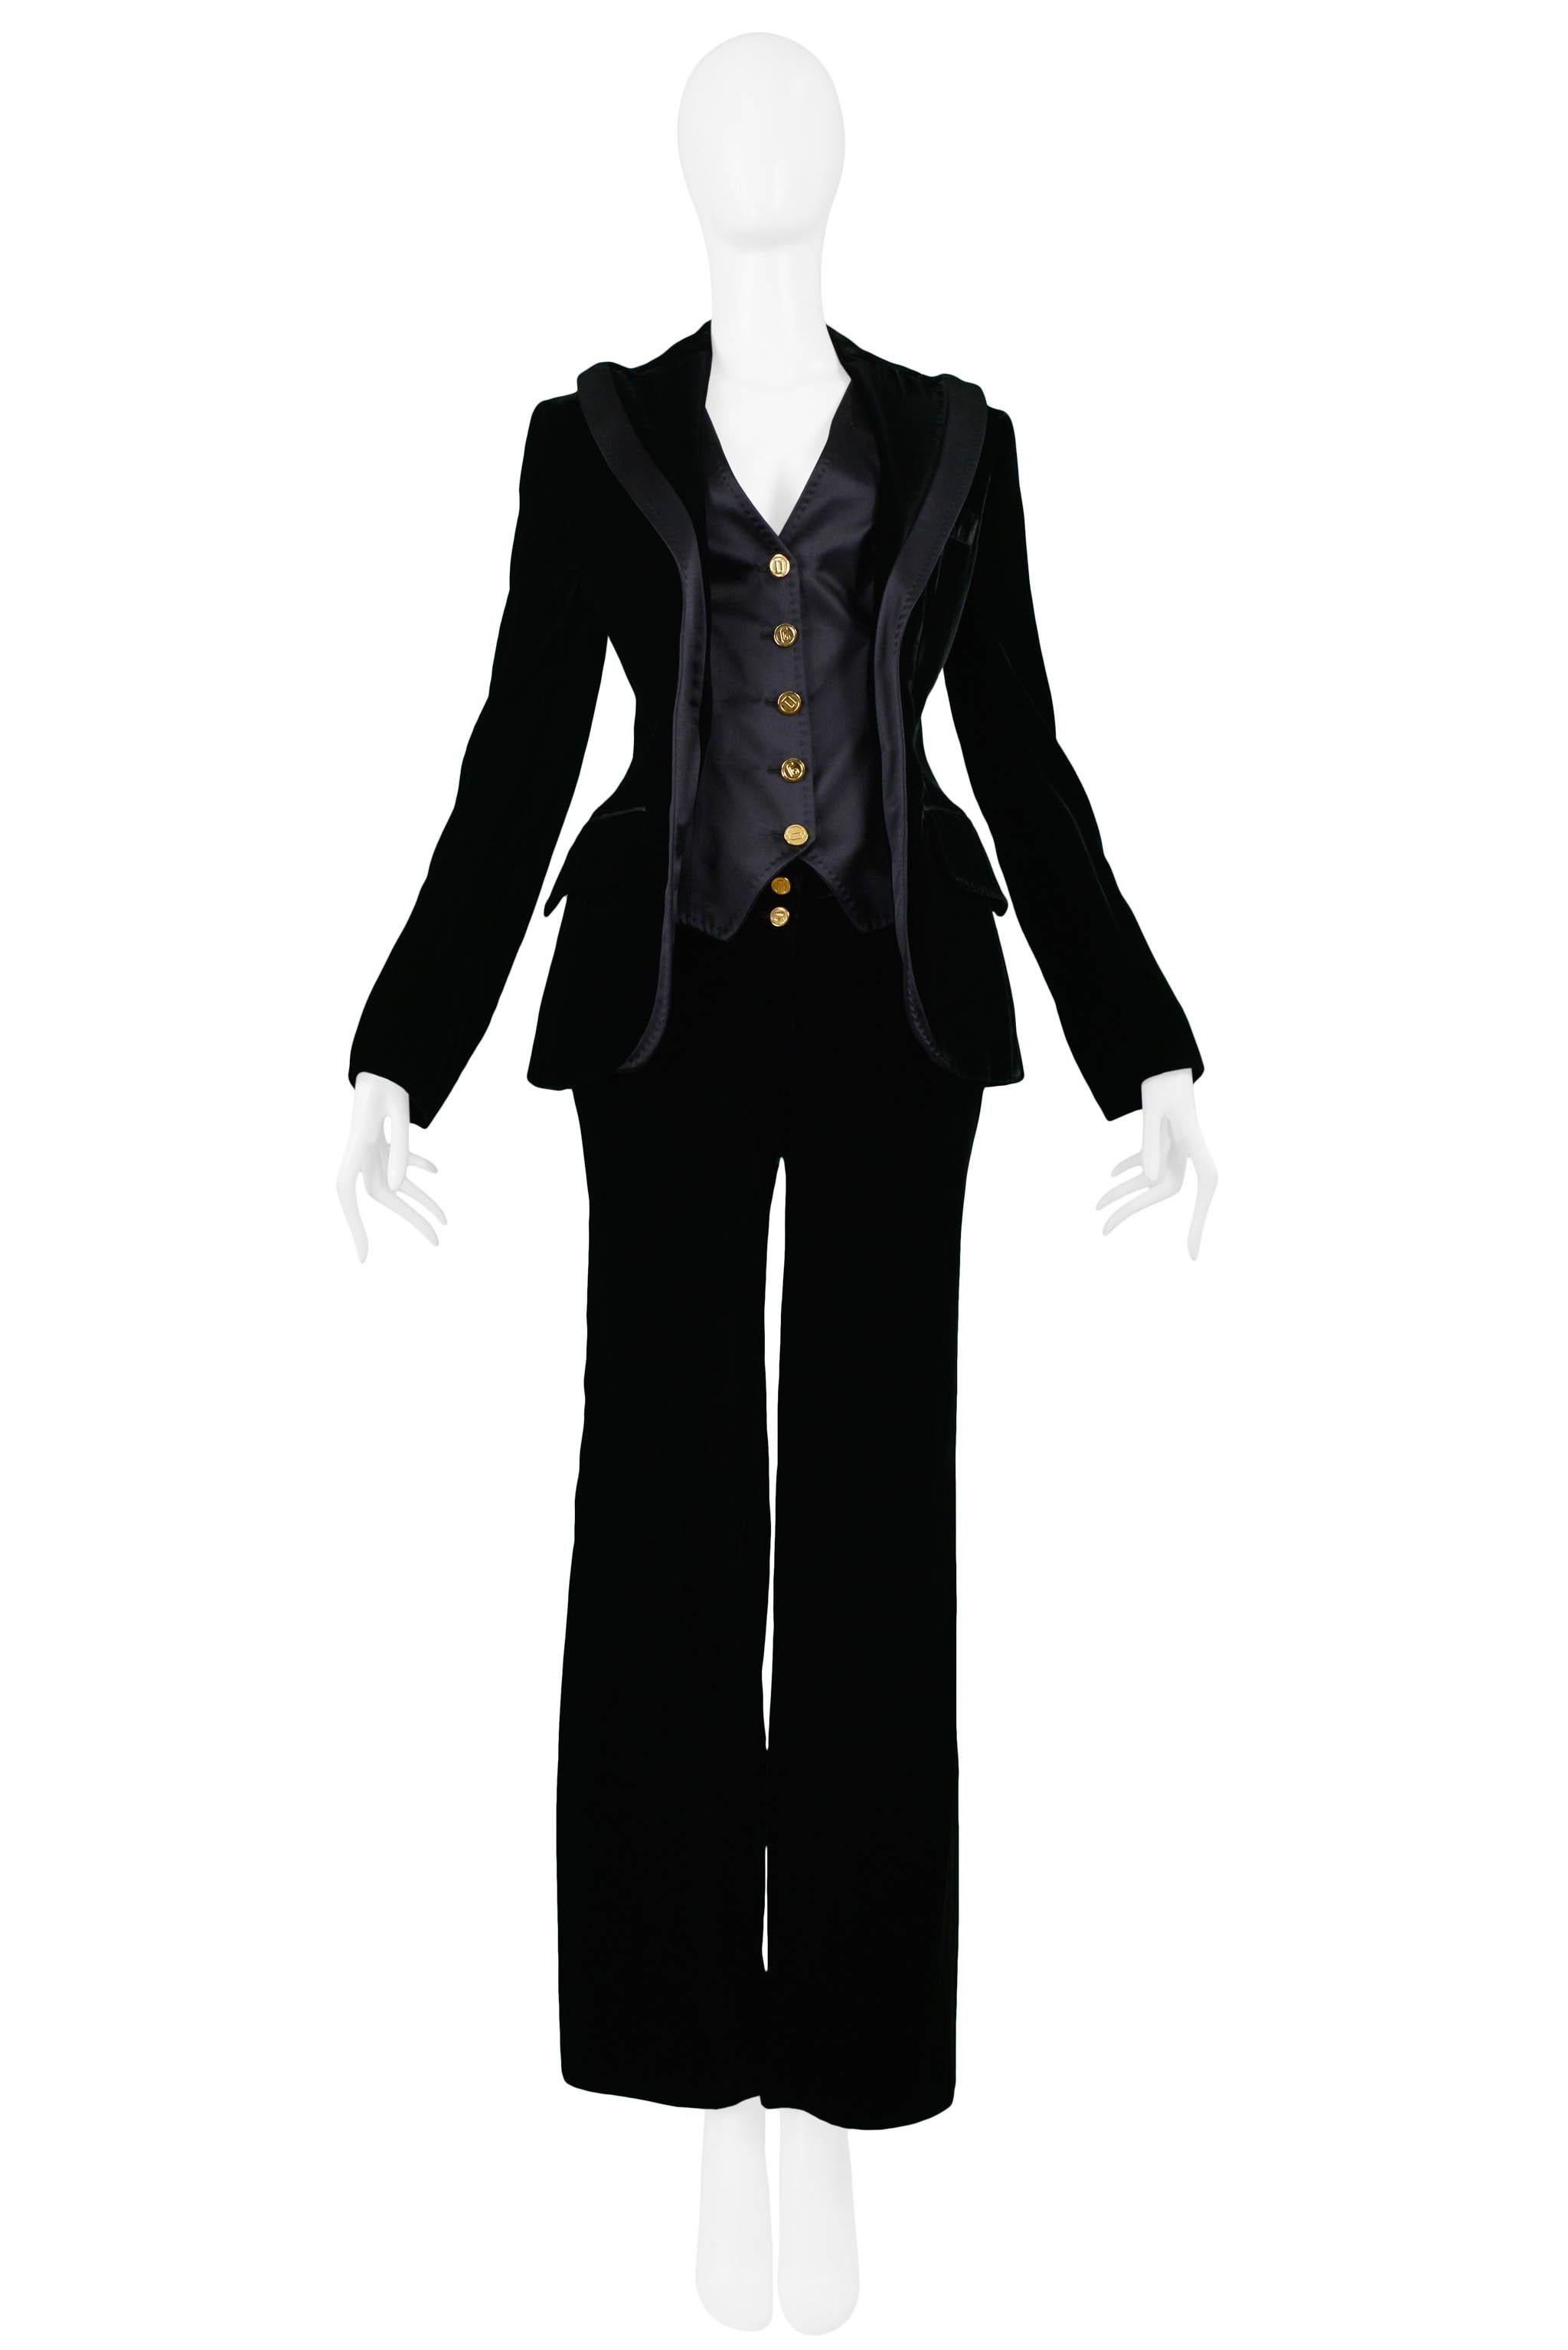 Resurrection Vintage is excited to offer a vintage Dolce & Gabbana black velvet tuxedo ensemble. The suit features a fitted black velvet jacket with an attached black satin vest, satin trim, flap pockets, and skinny sleeves with gold buttons. The